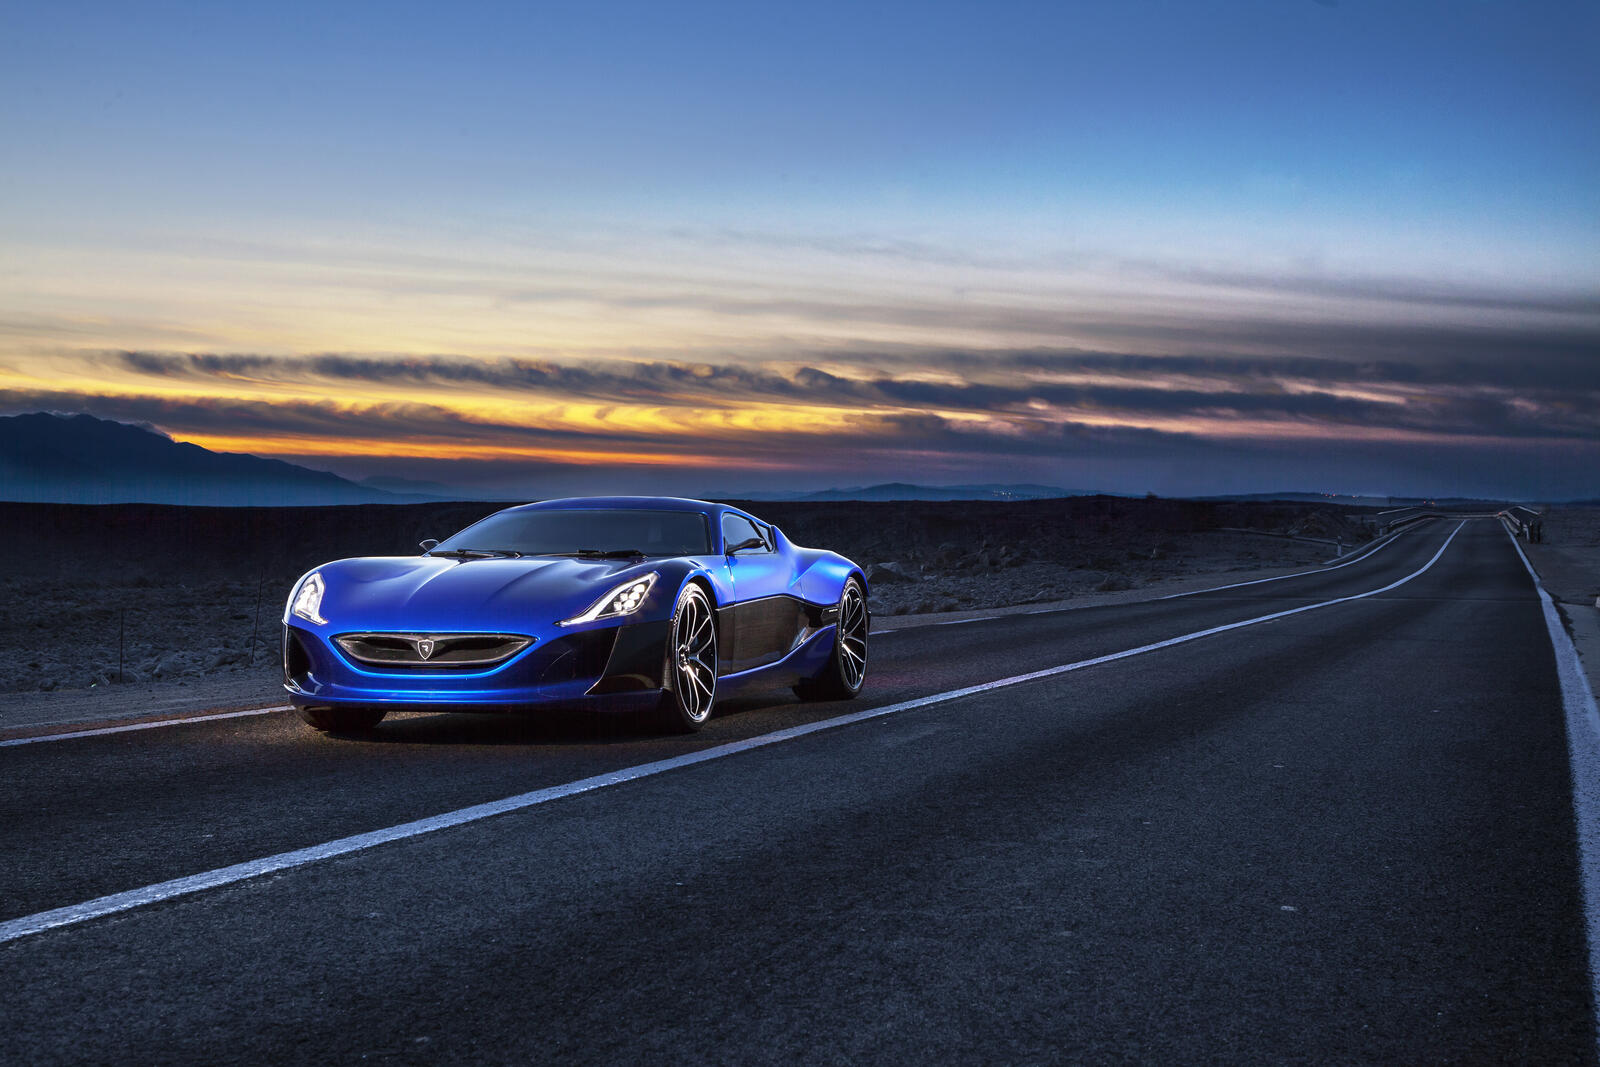 Wallpapers Rimac Concept One cars concept on the desktop